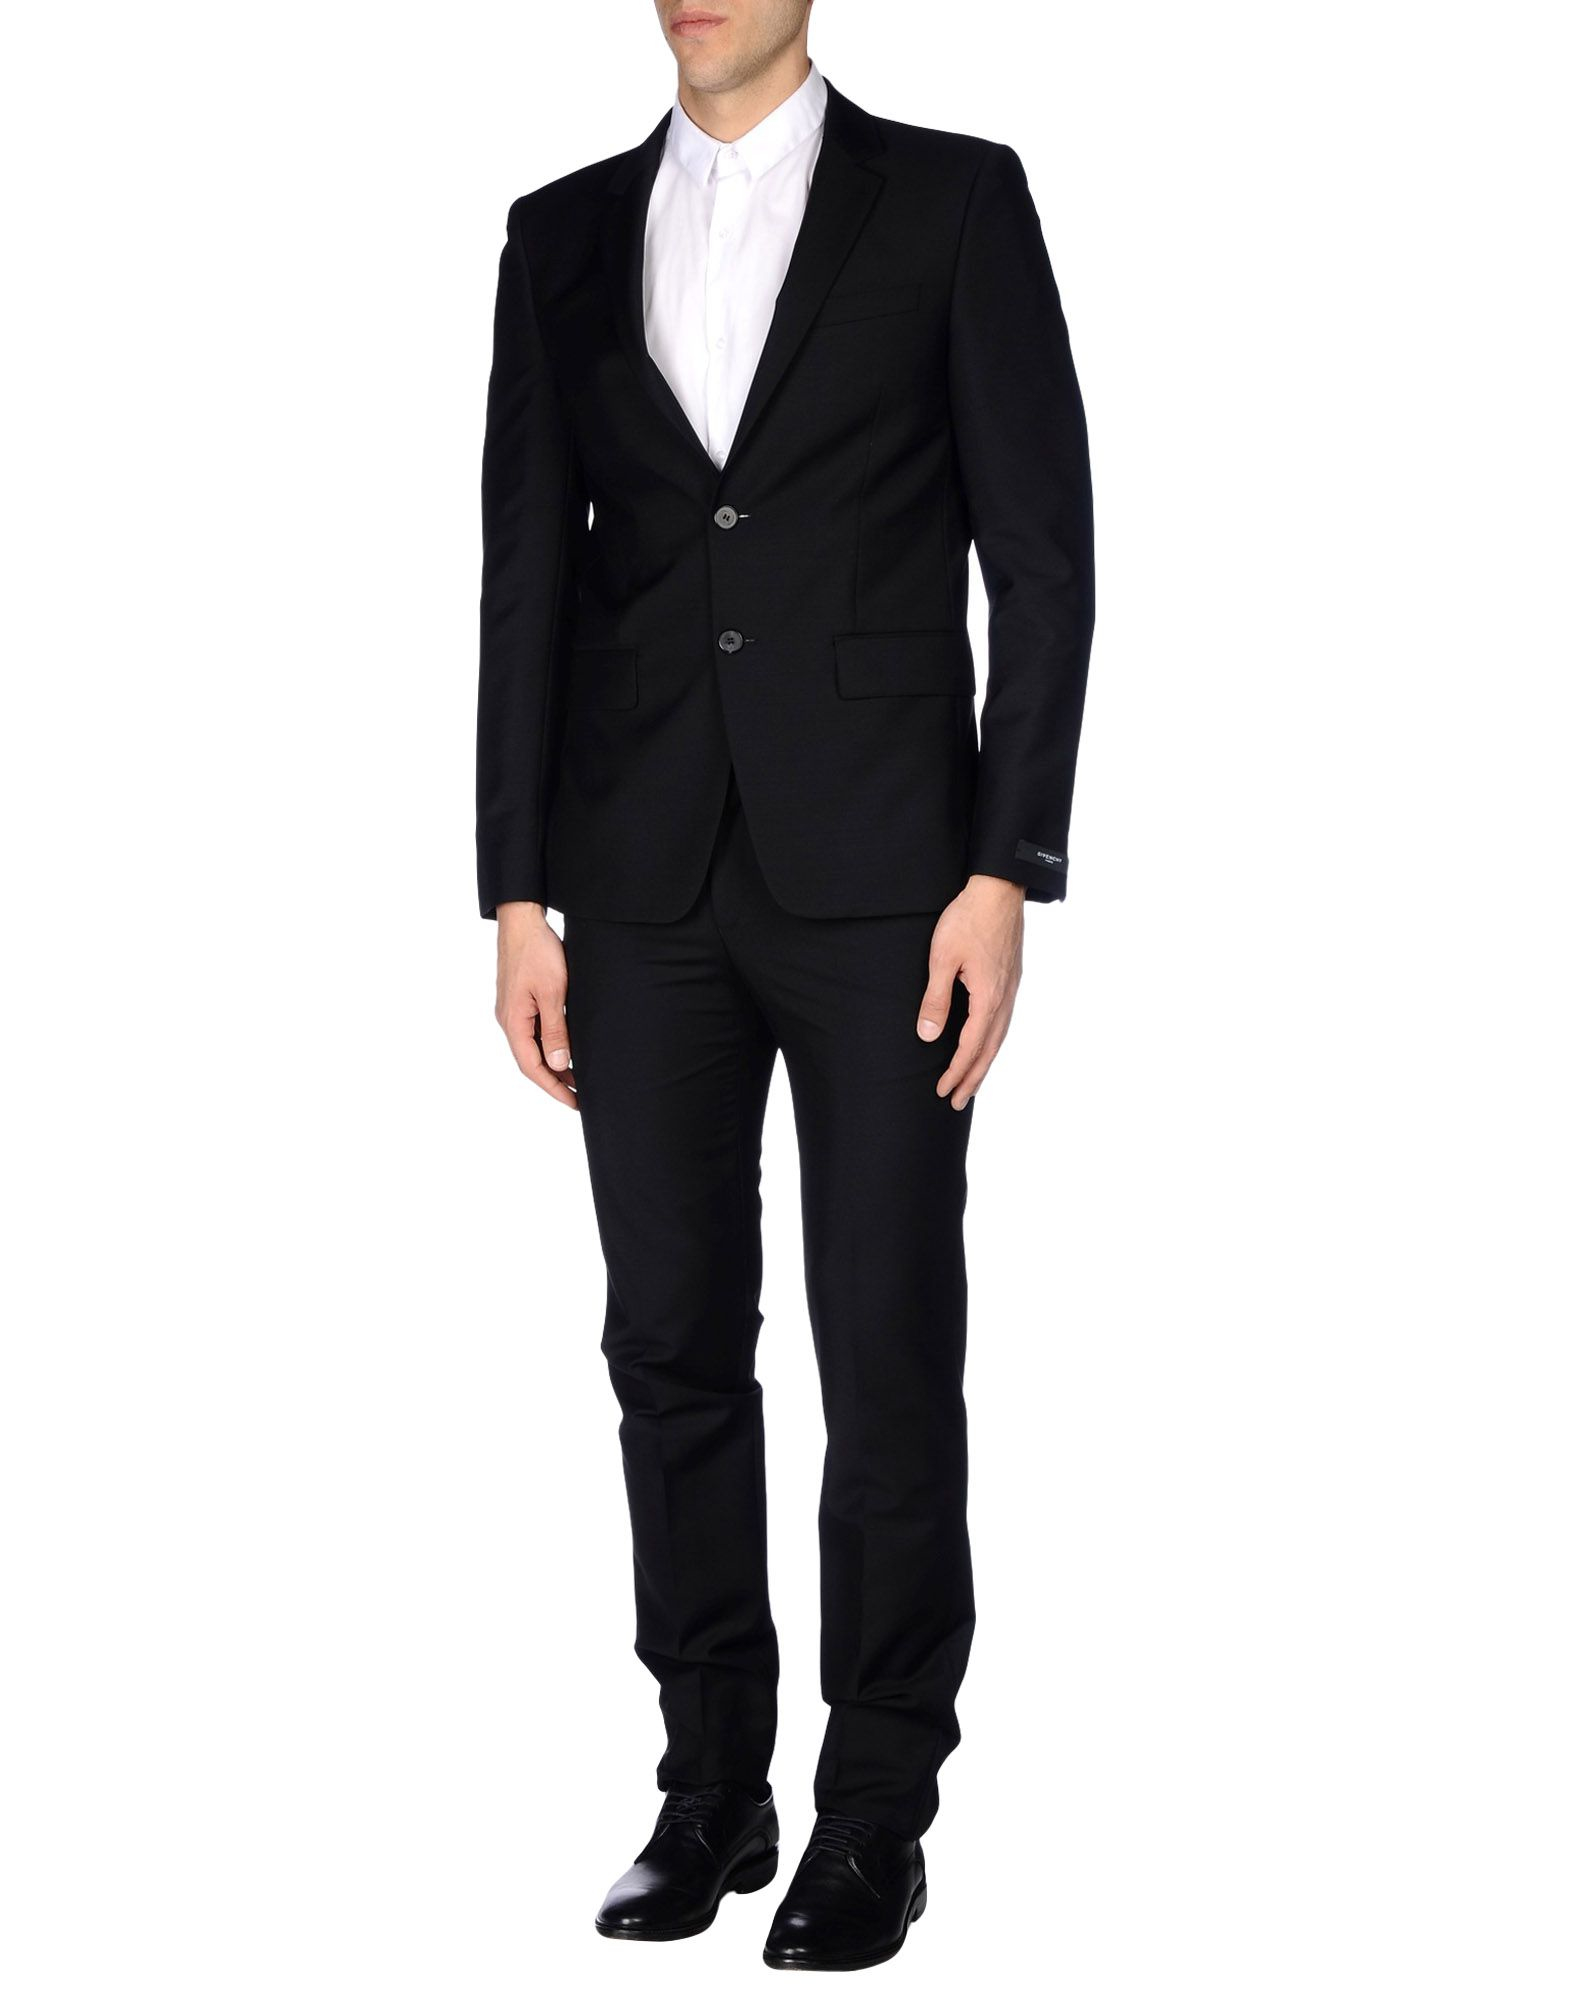 Lyst - Givenchy Suit in Black for Men